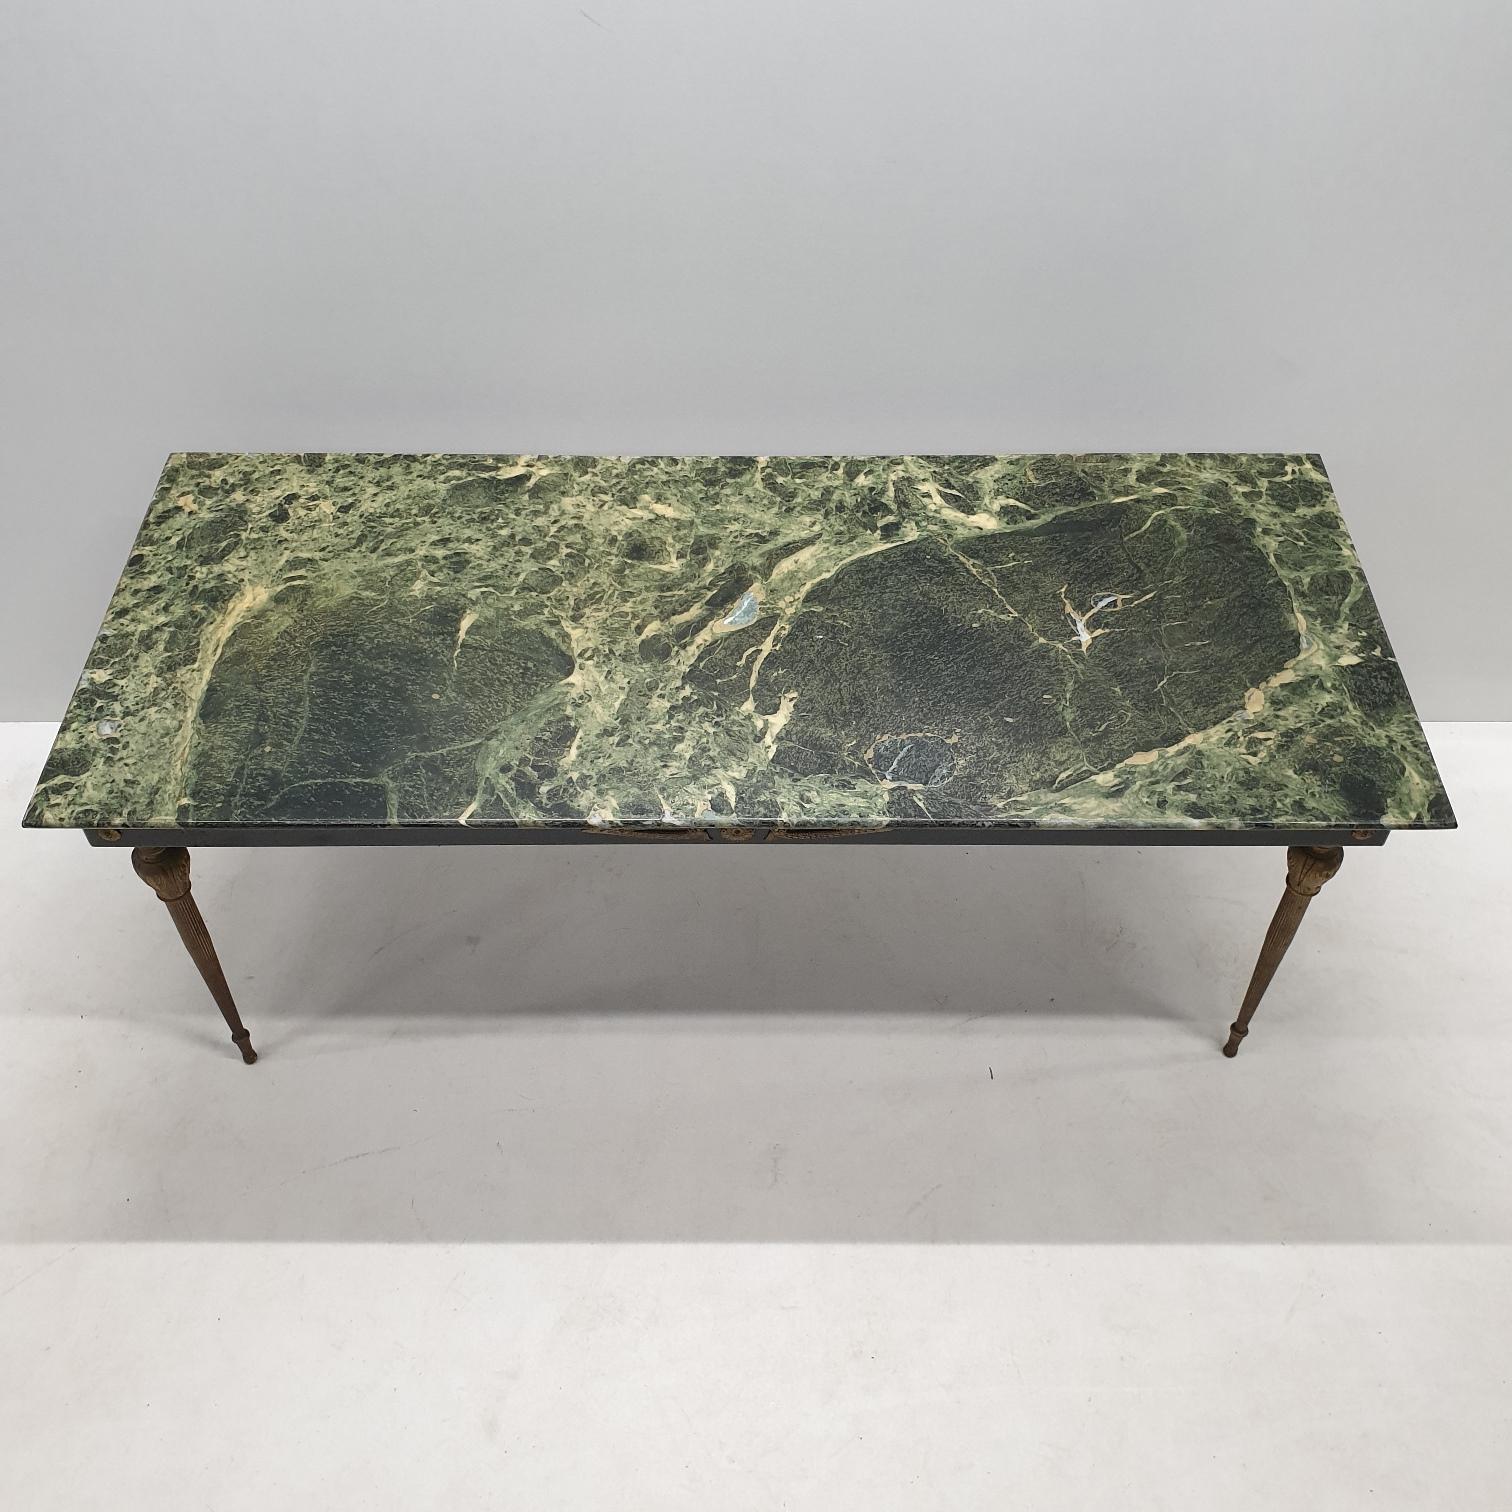 Vintage Brass Coffee Table with a Green Marble Top, 1950s For Sale 3